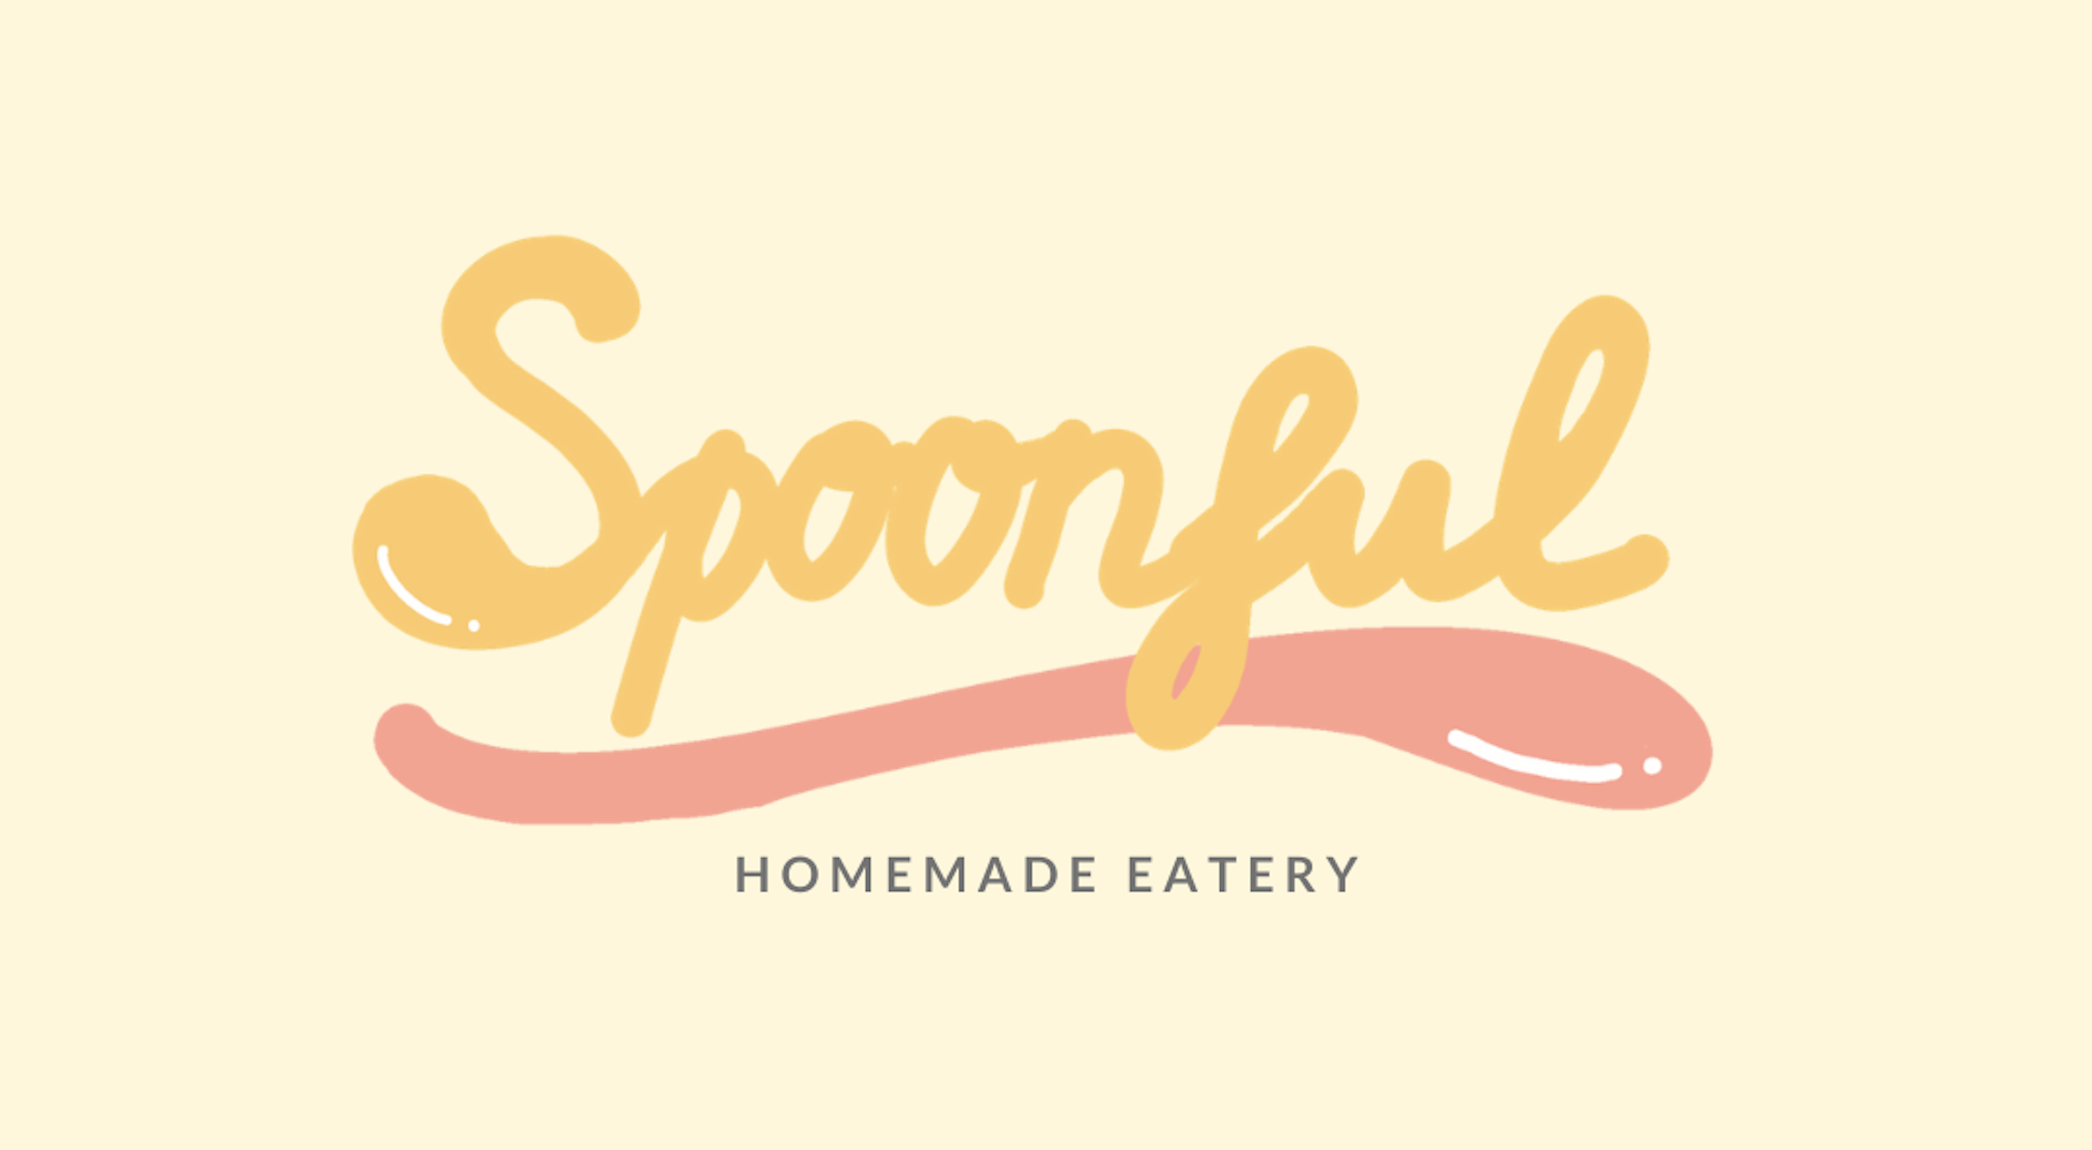 Spoonful – Homemade Eatery